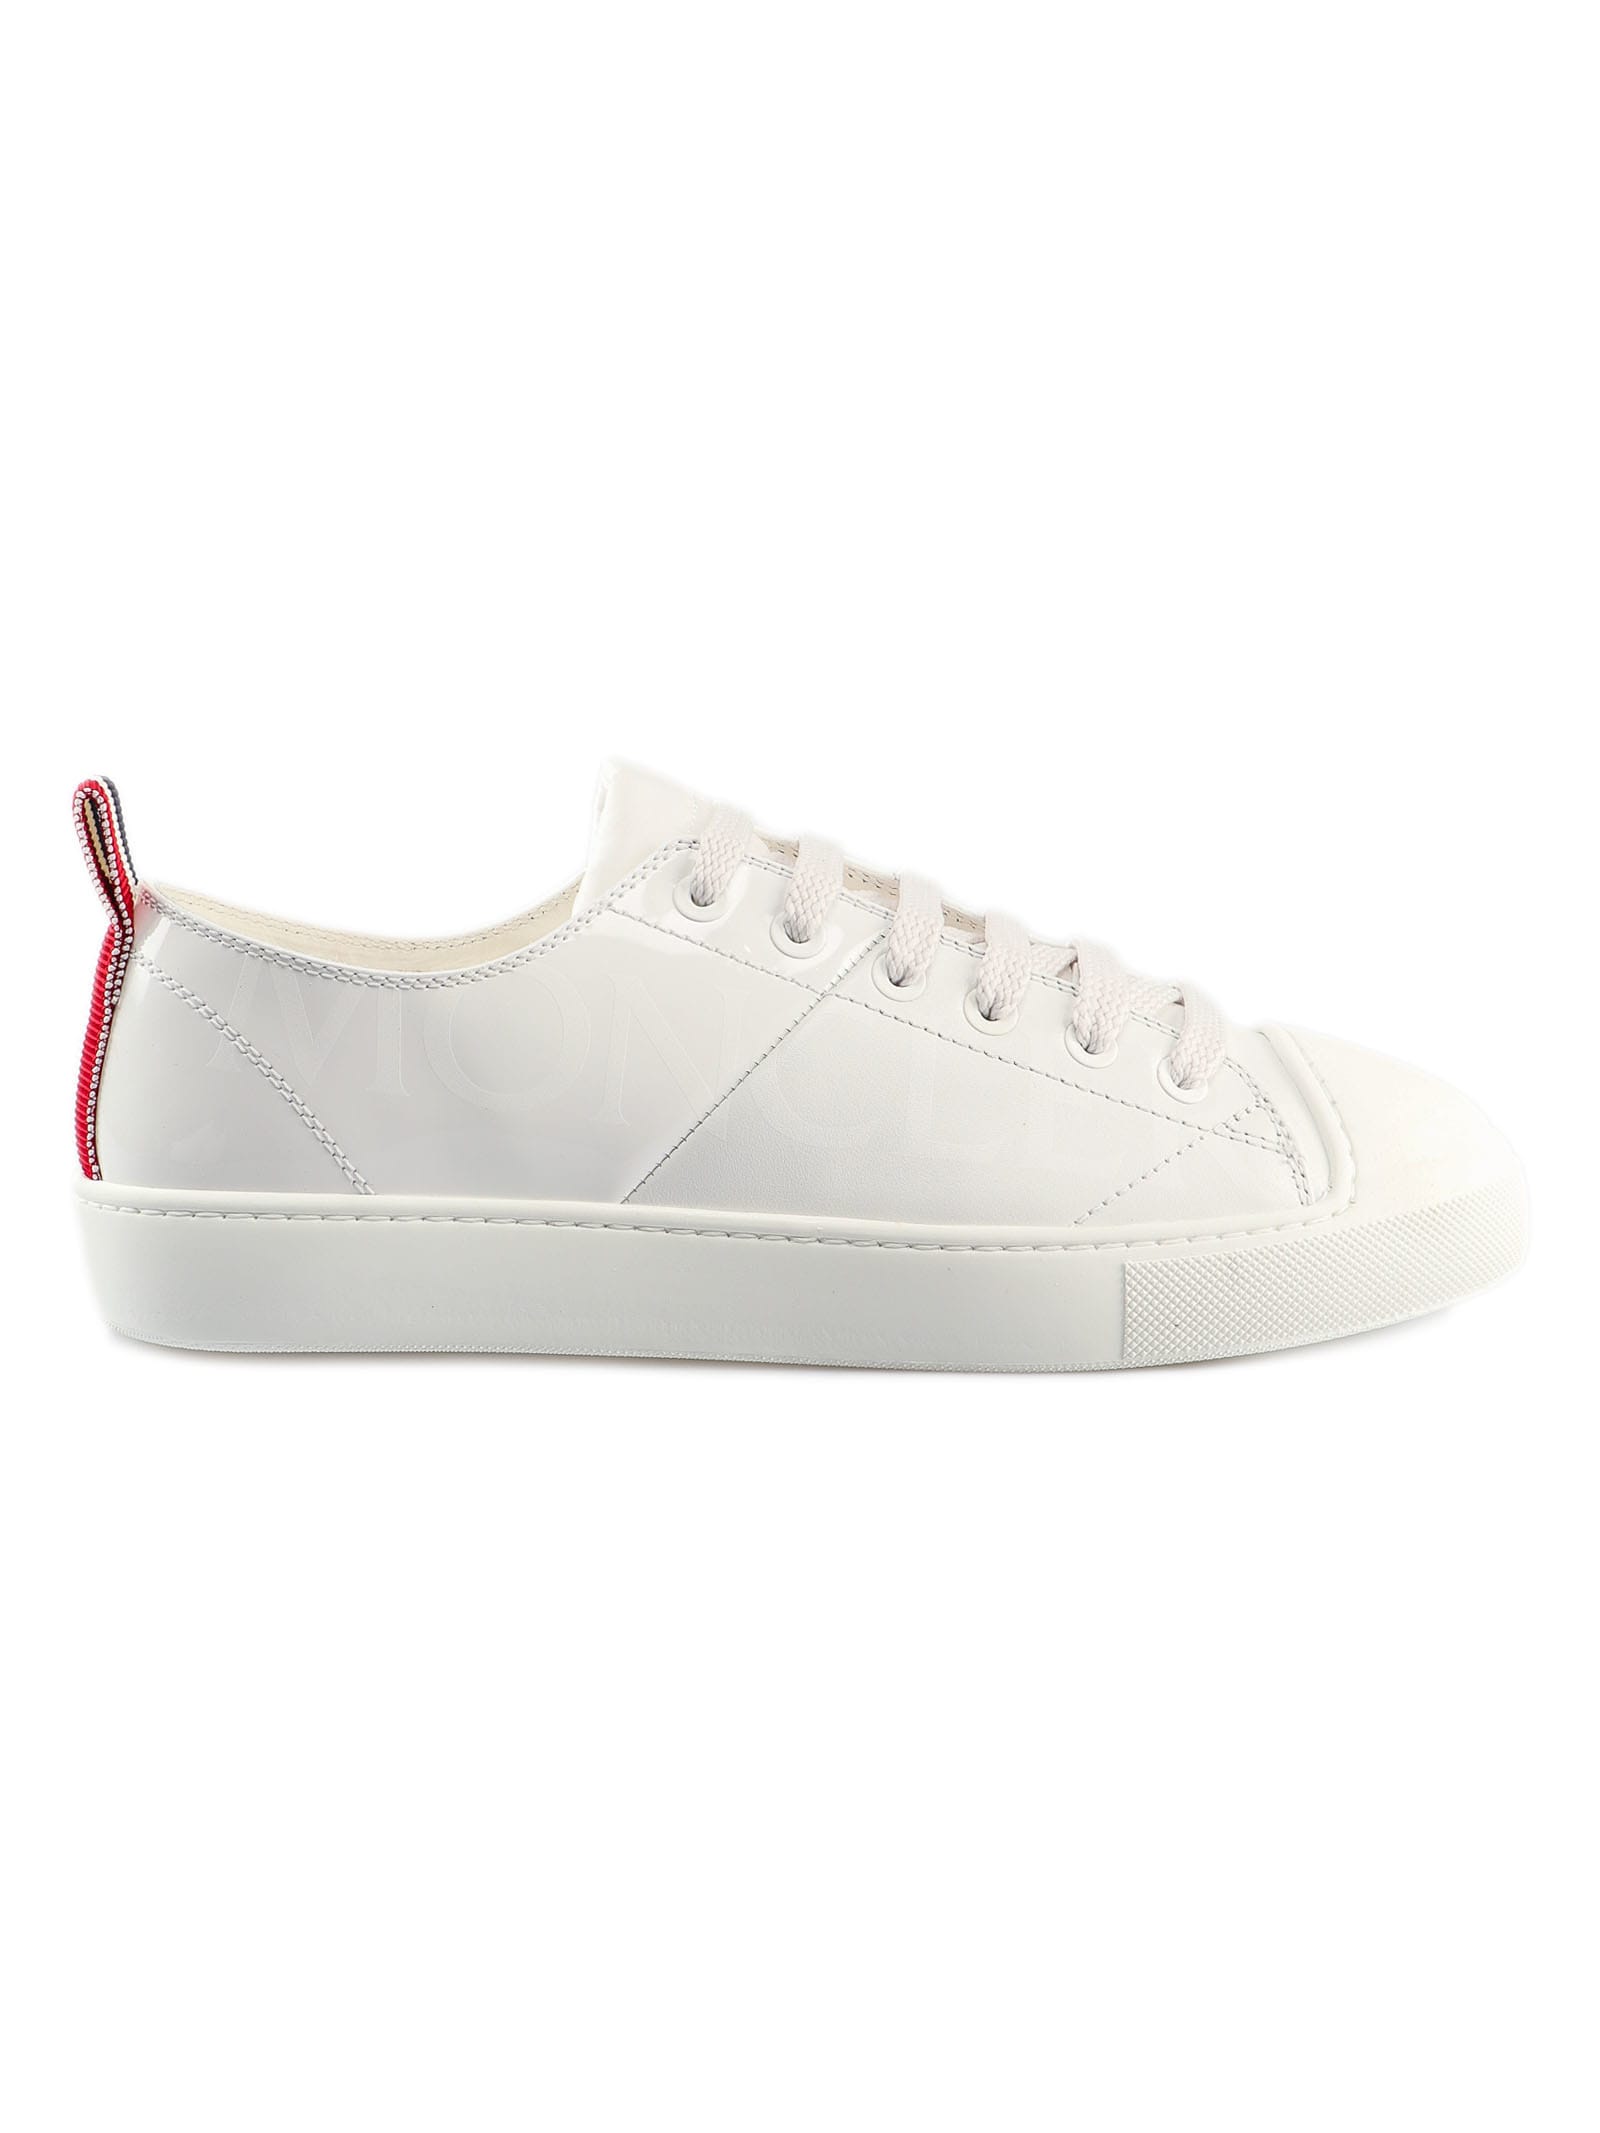 Moncler Moncler Lace-up Sneakers - White - 10825815 | italist